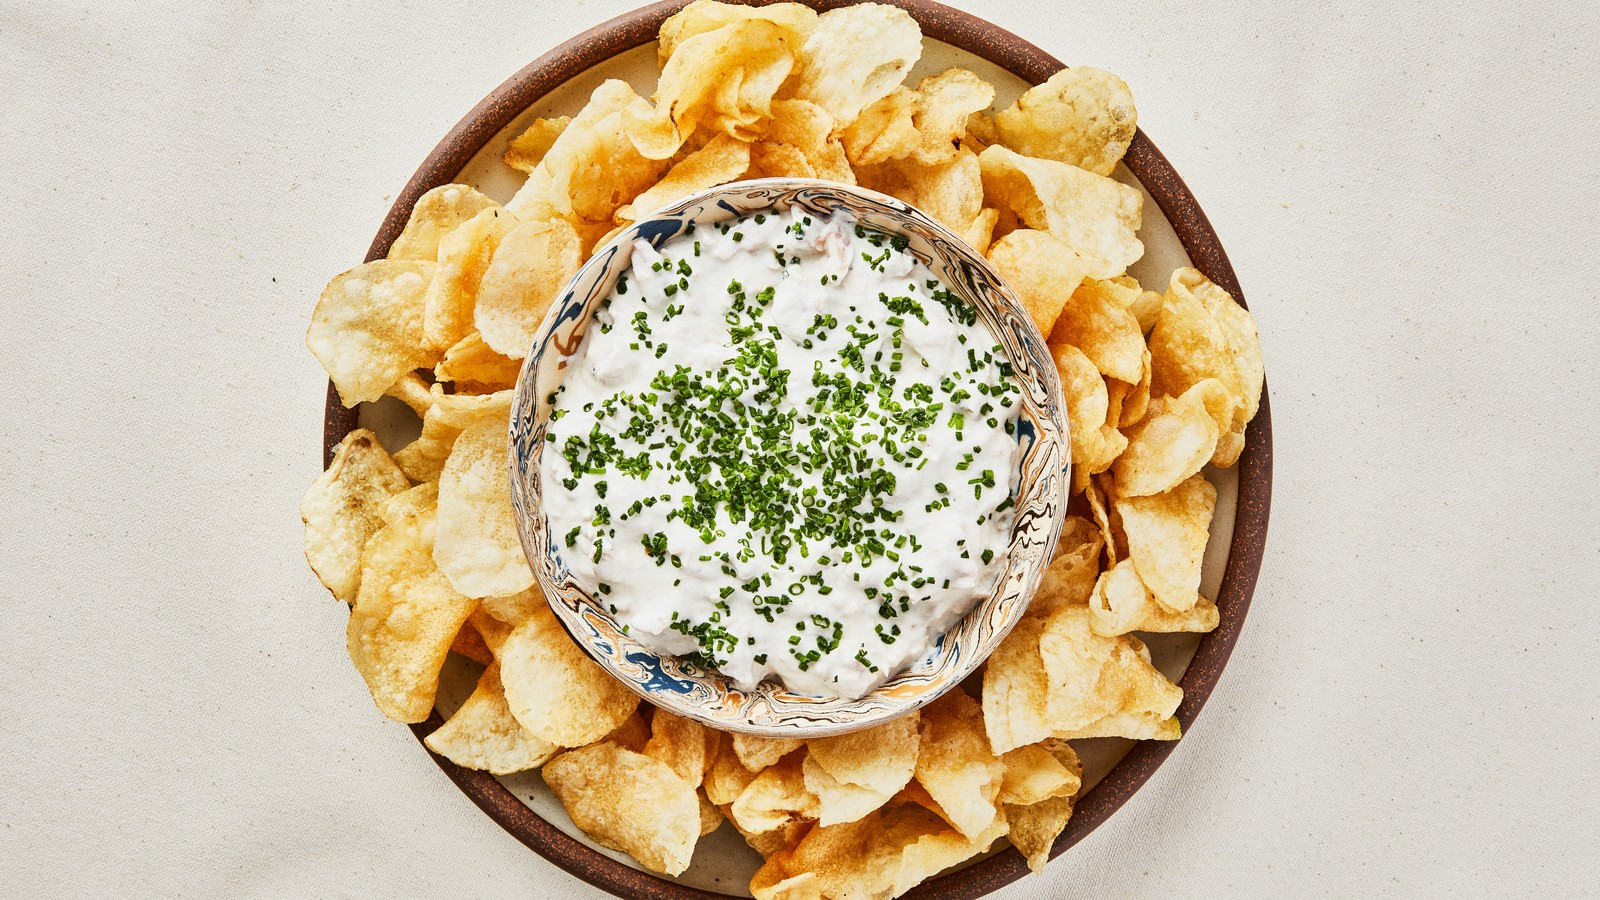 Super Bowl Party Dips Recipes
 50 Super Bowl Dip Recipes from Guacamole to ion Dip